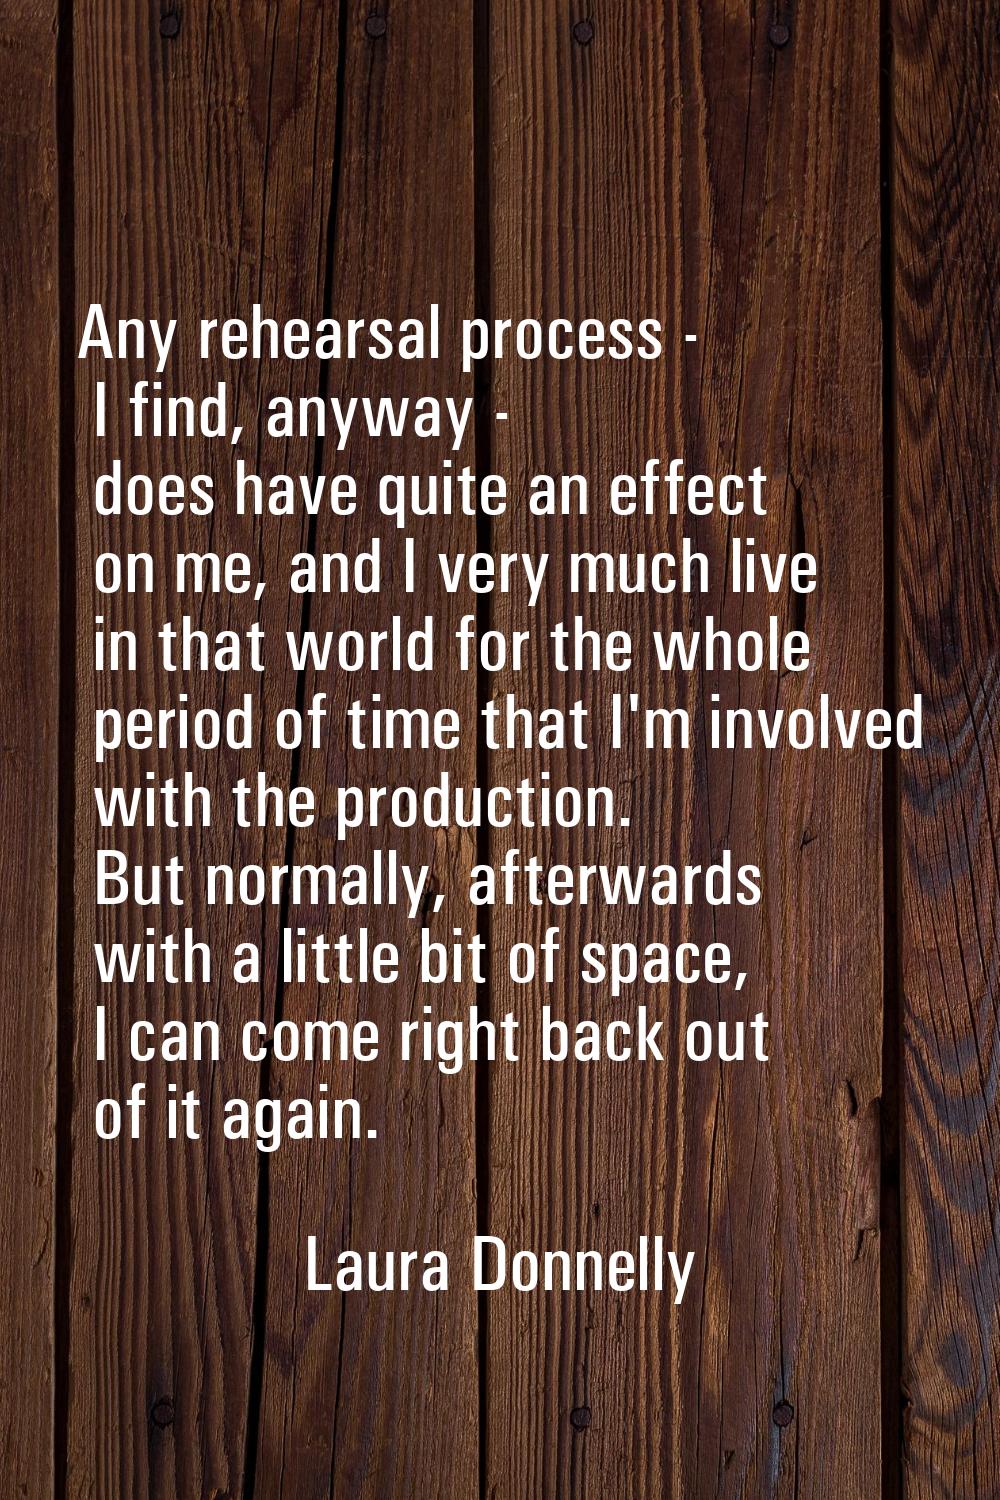 Any rehearsal process - I find, anyway - does have quite an effect on me, and I very much live in t